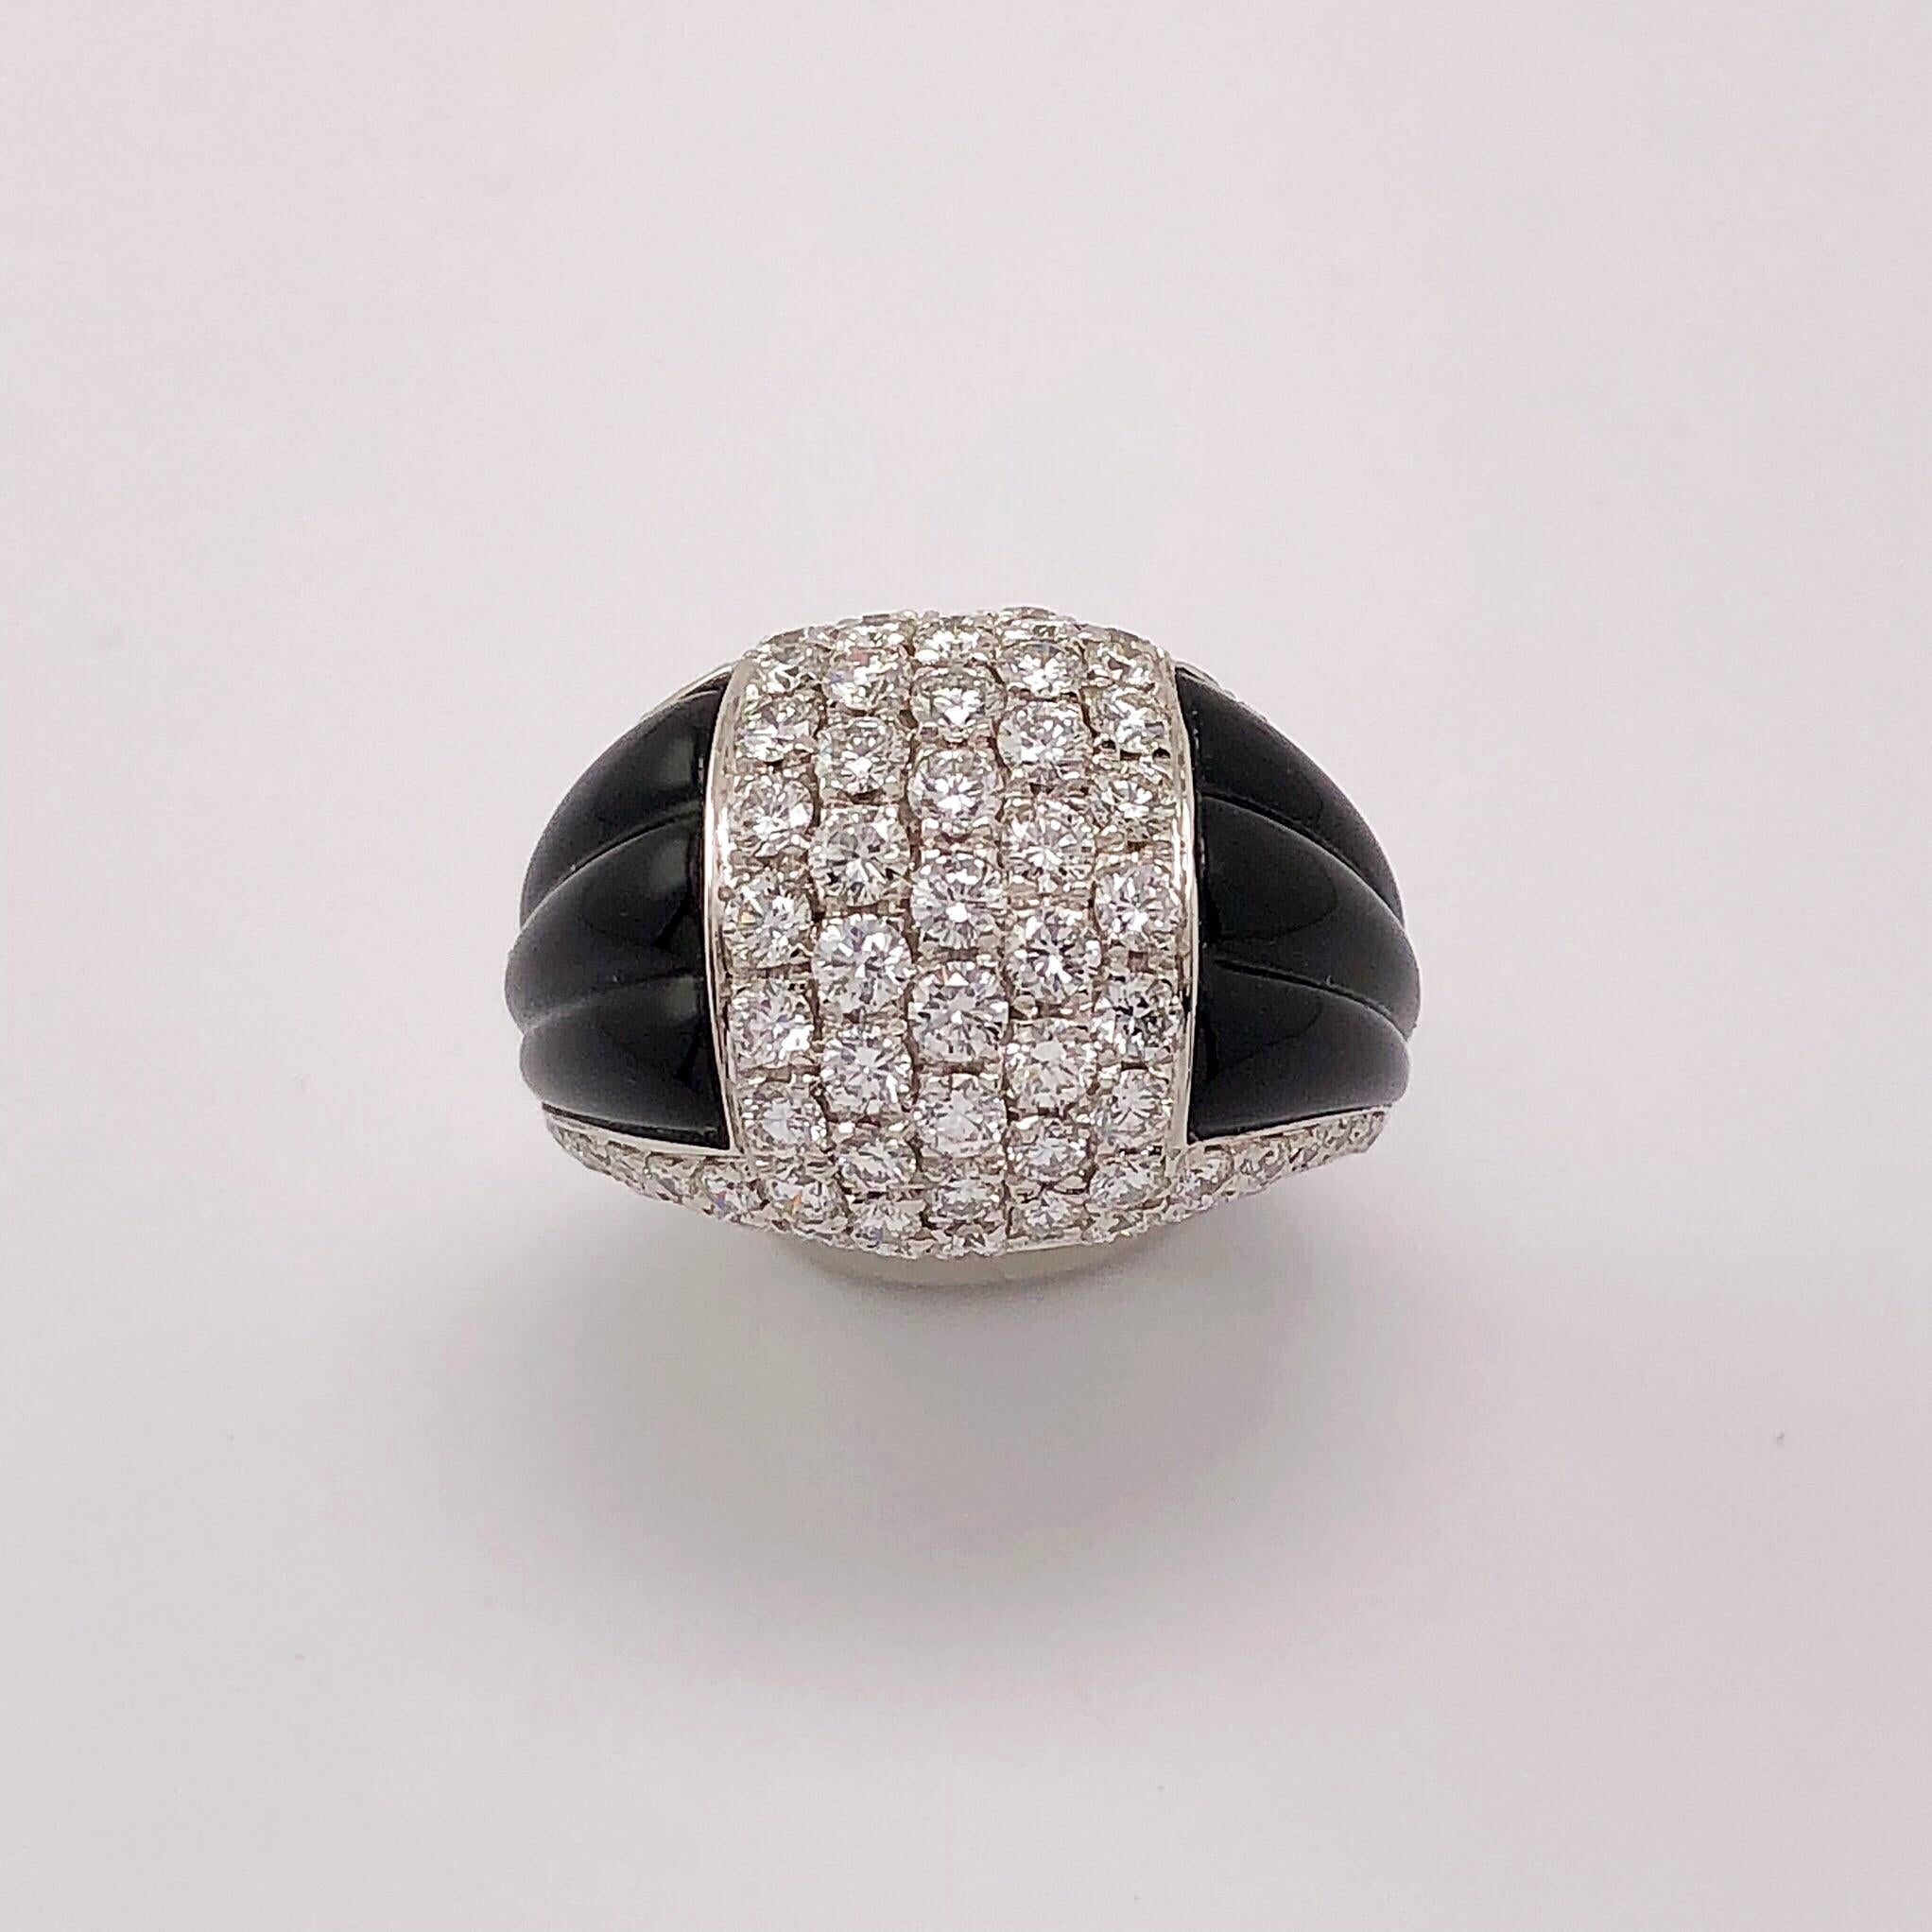 This gorgeous 18 kt. white gold diamond ring is handcrafted by the renowned Italian designer Picchiotti.
Meticulously set with 1.94 carats of fine white brilliant diamonds flanked by hand carved fluted black onyx.
Ring size 6. Sizing